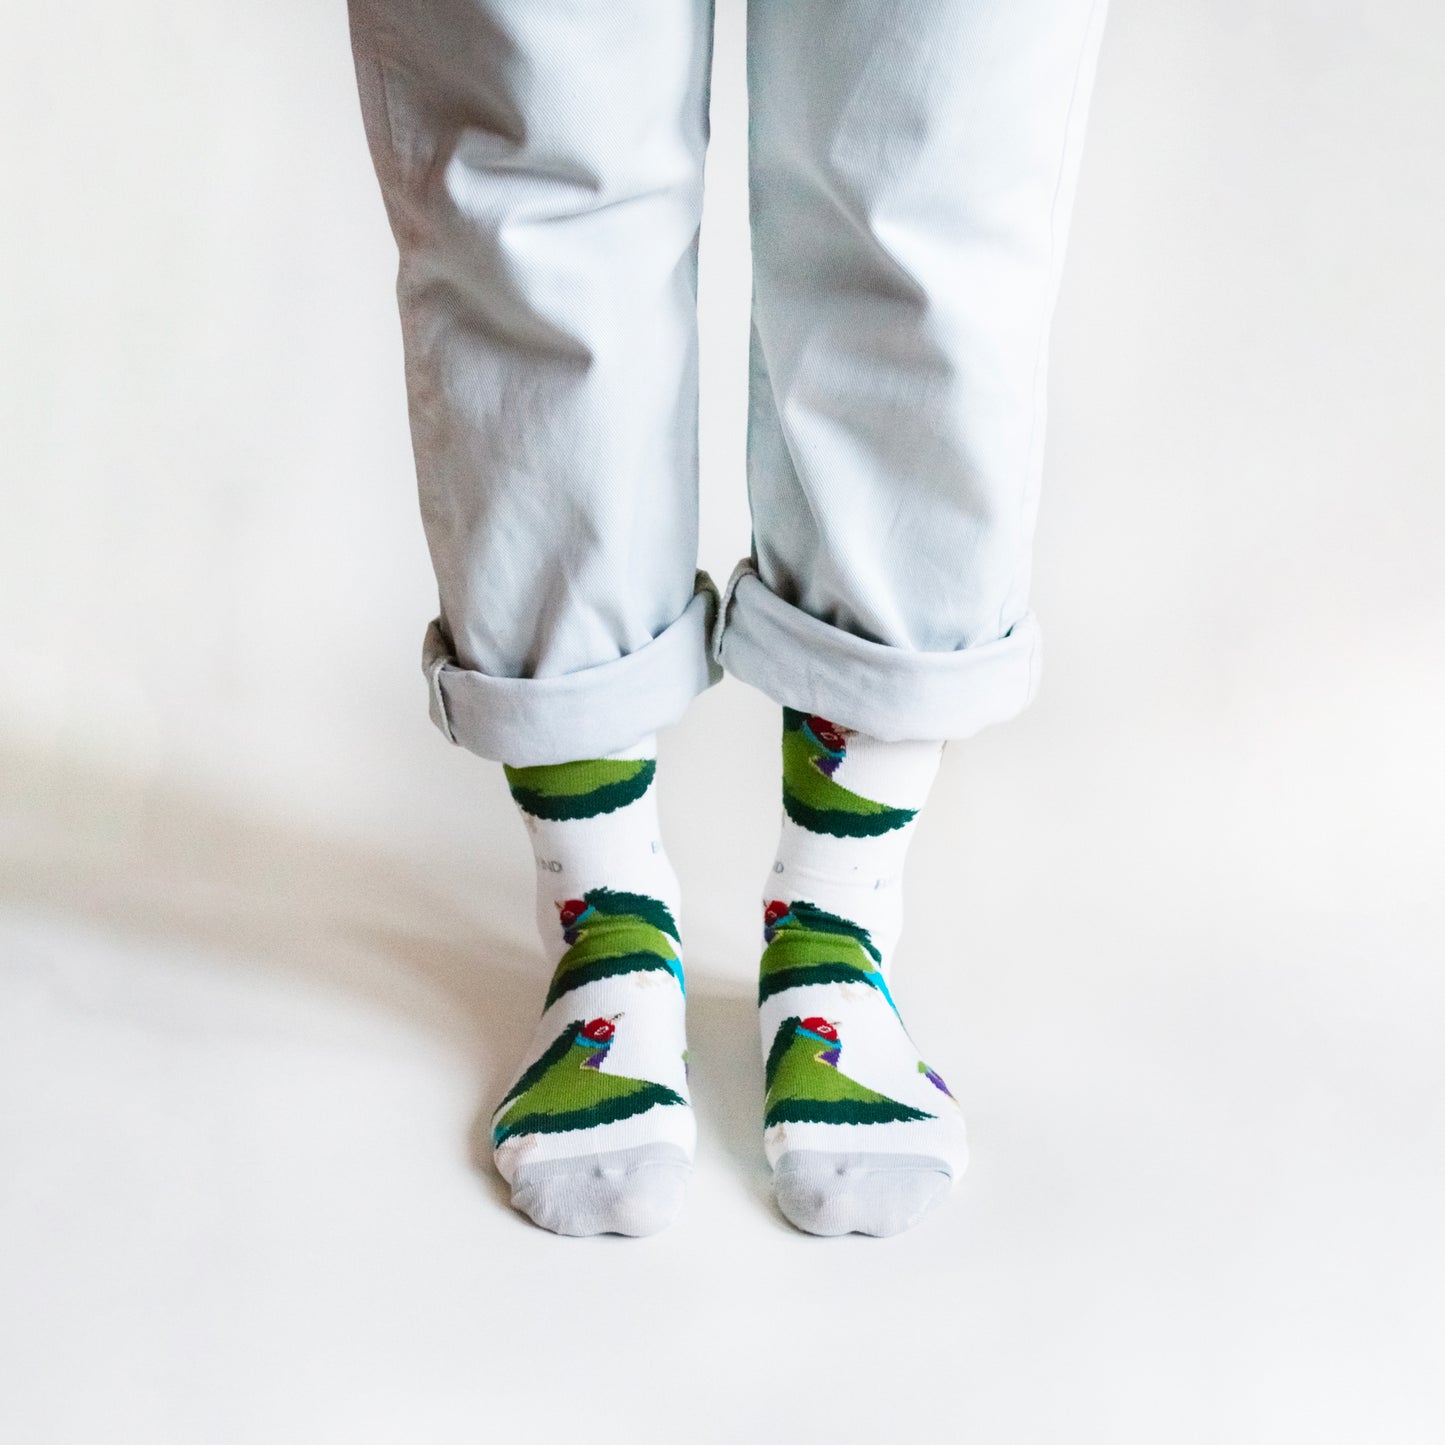 Bare Kind Bamboo Socks - Save the Gouldian Finches